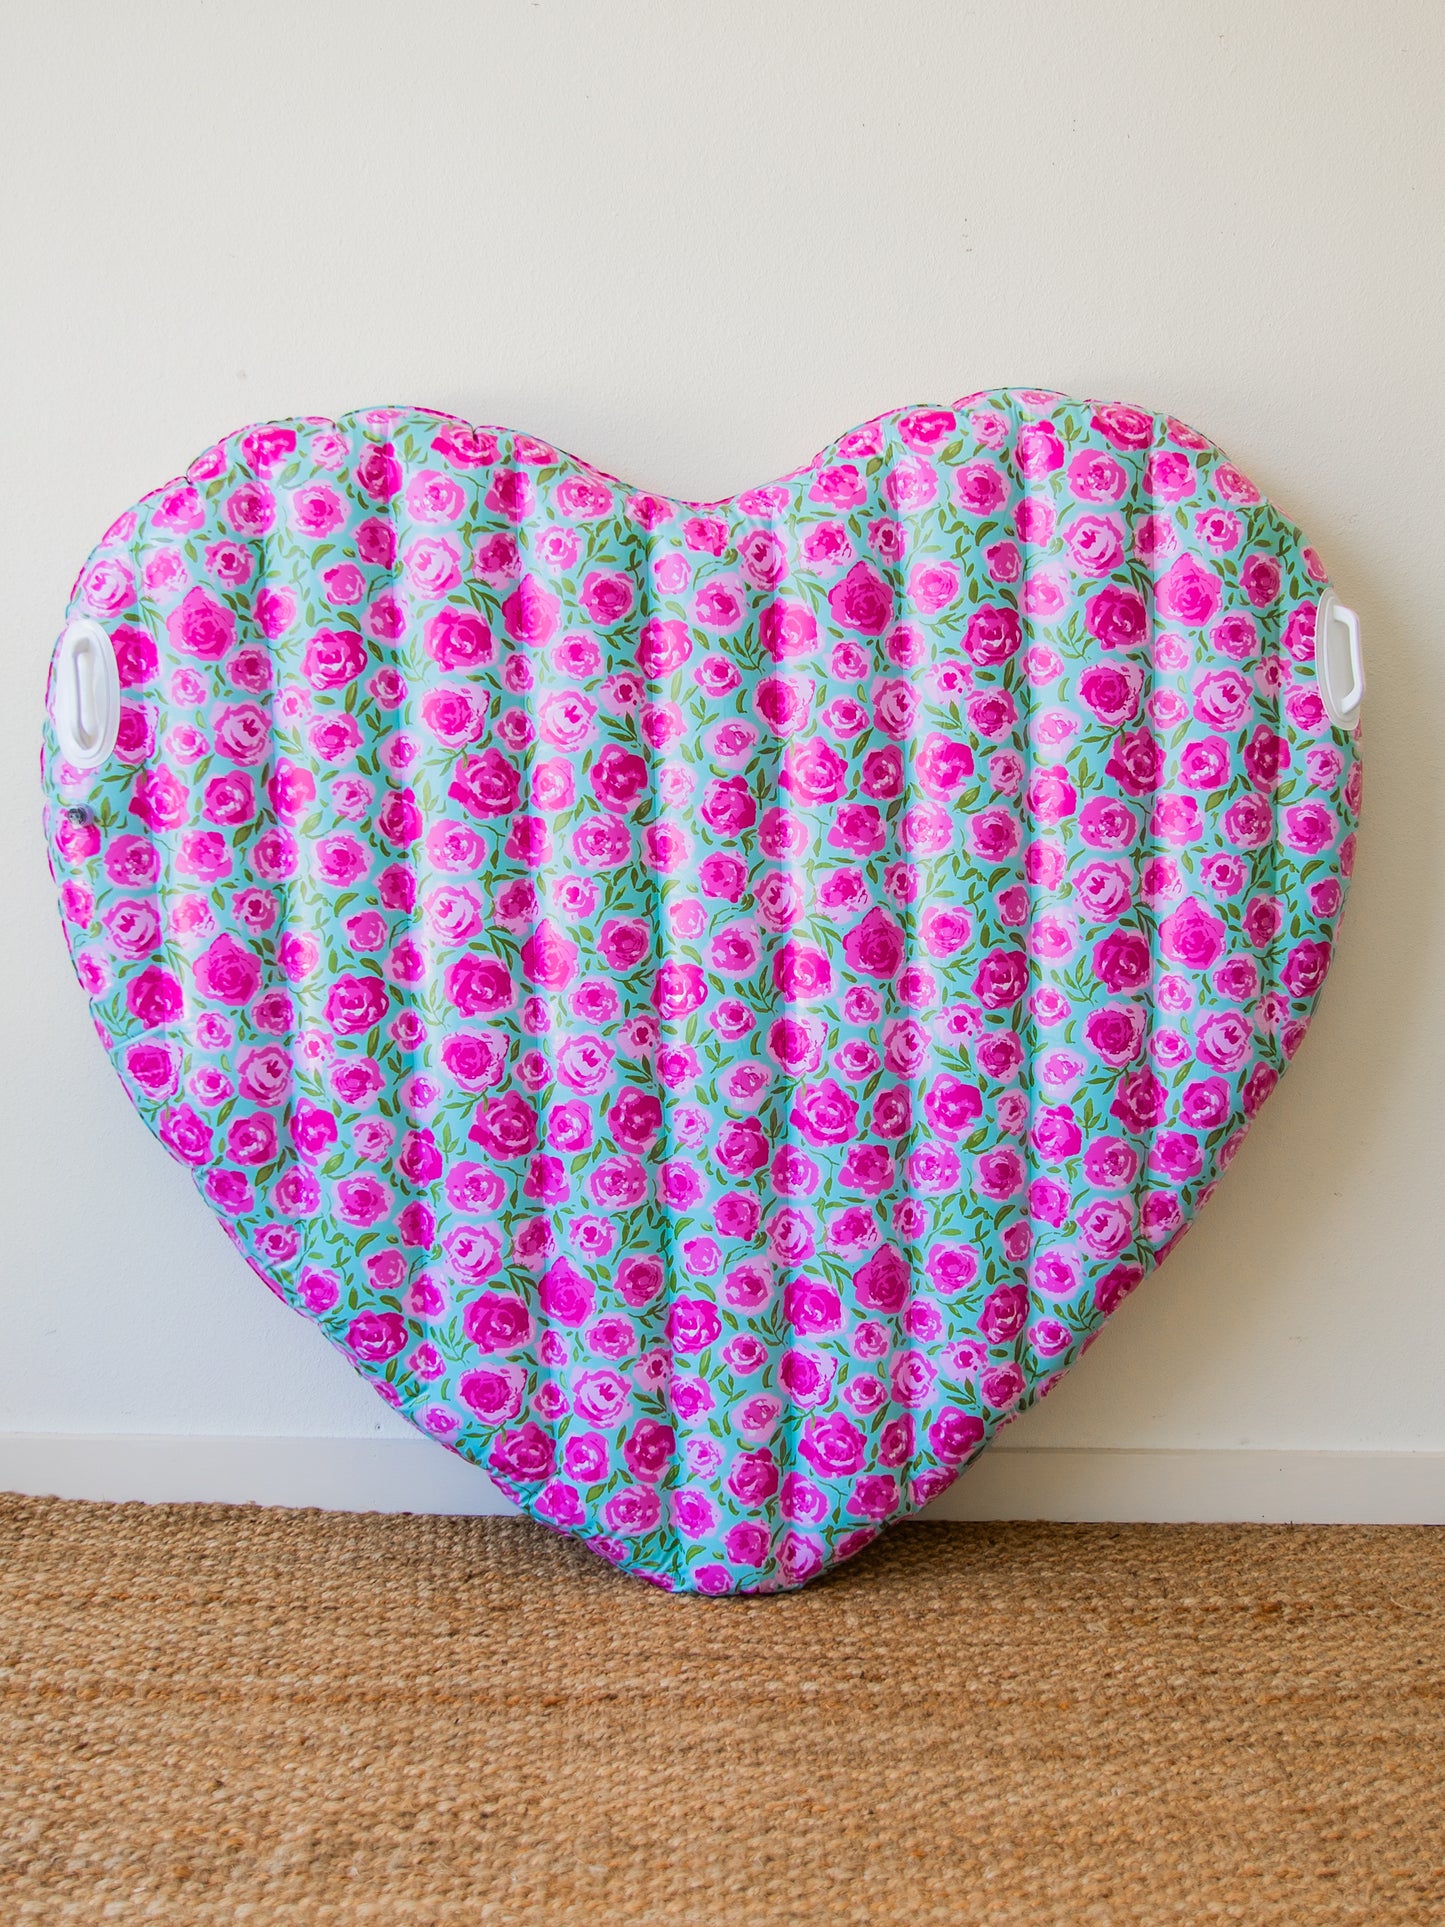 Heart Pool Float - Covered in Roses on Aqua